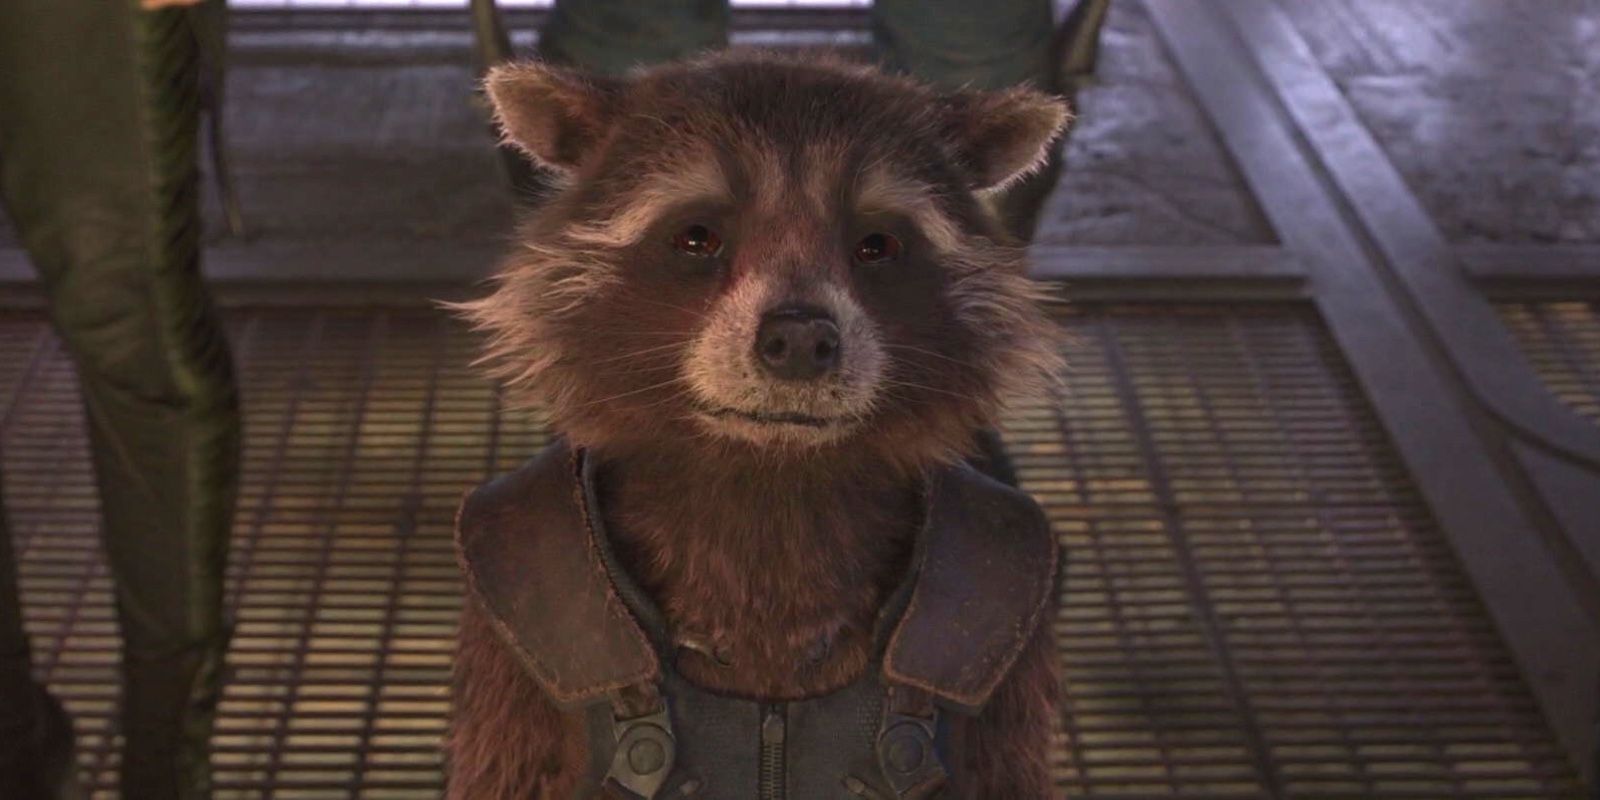 Rocket at Yondu's funeral in Guardians of the Galaxy Vol 2